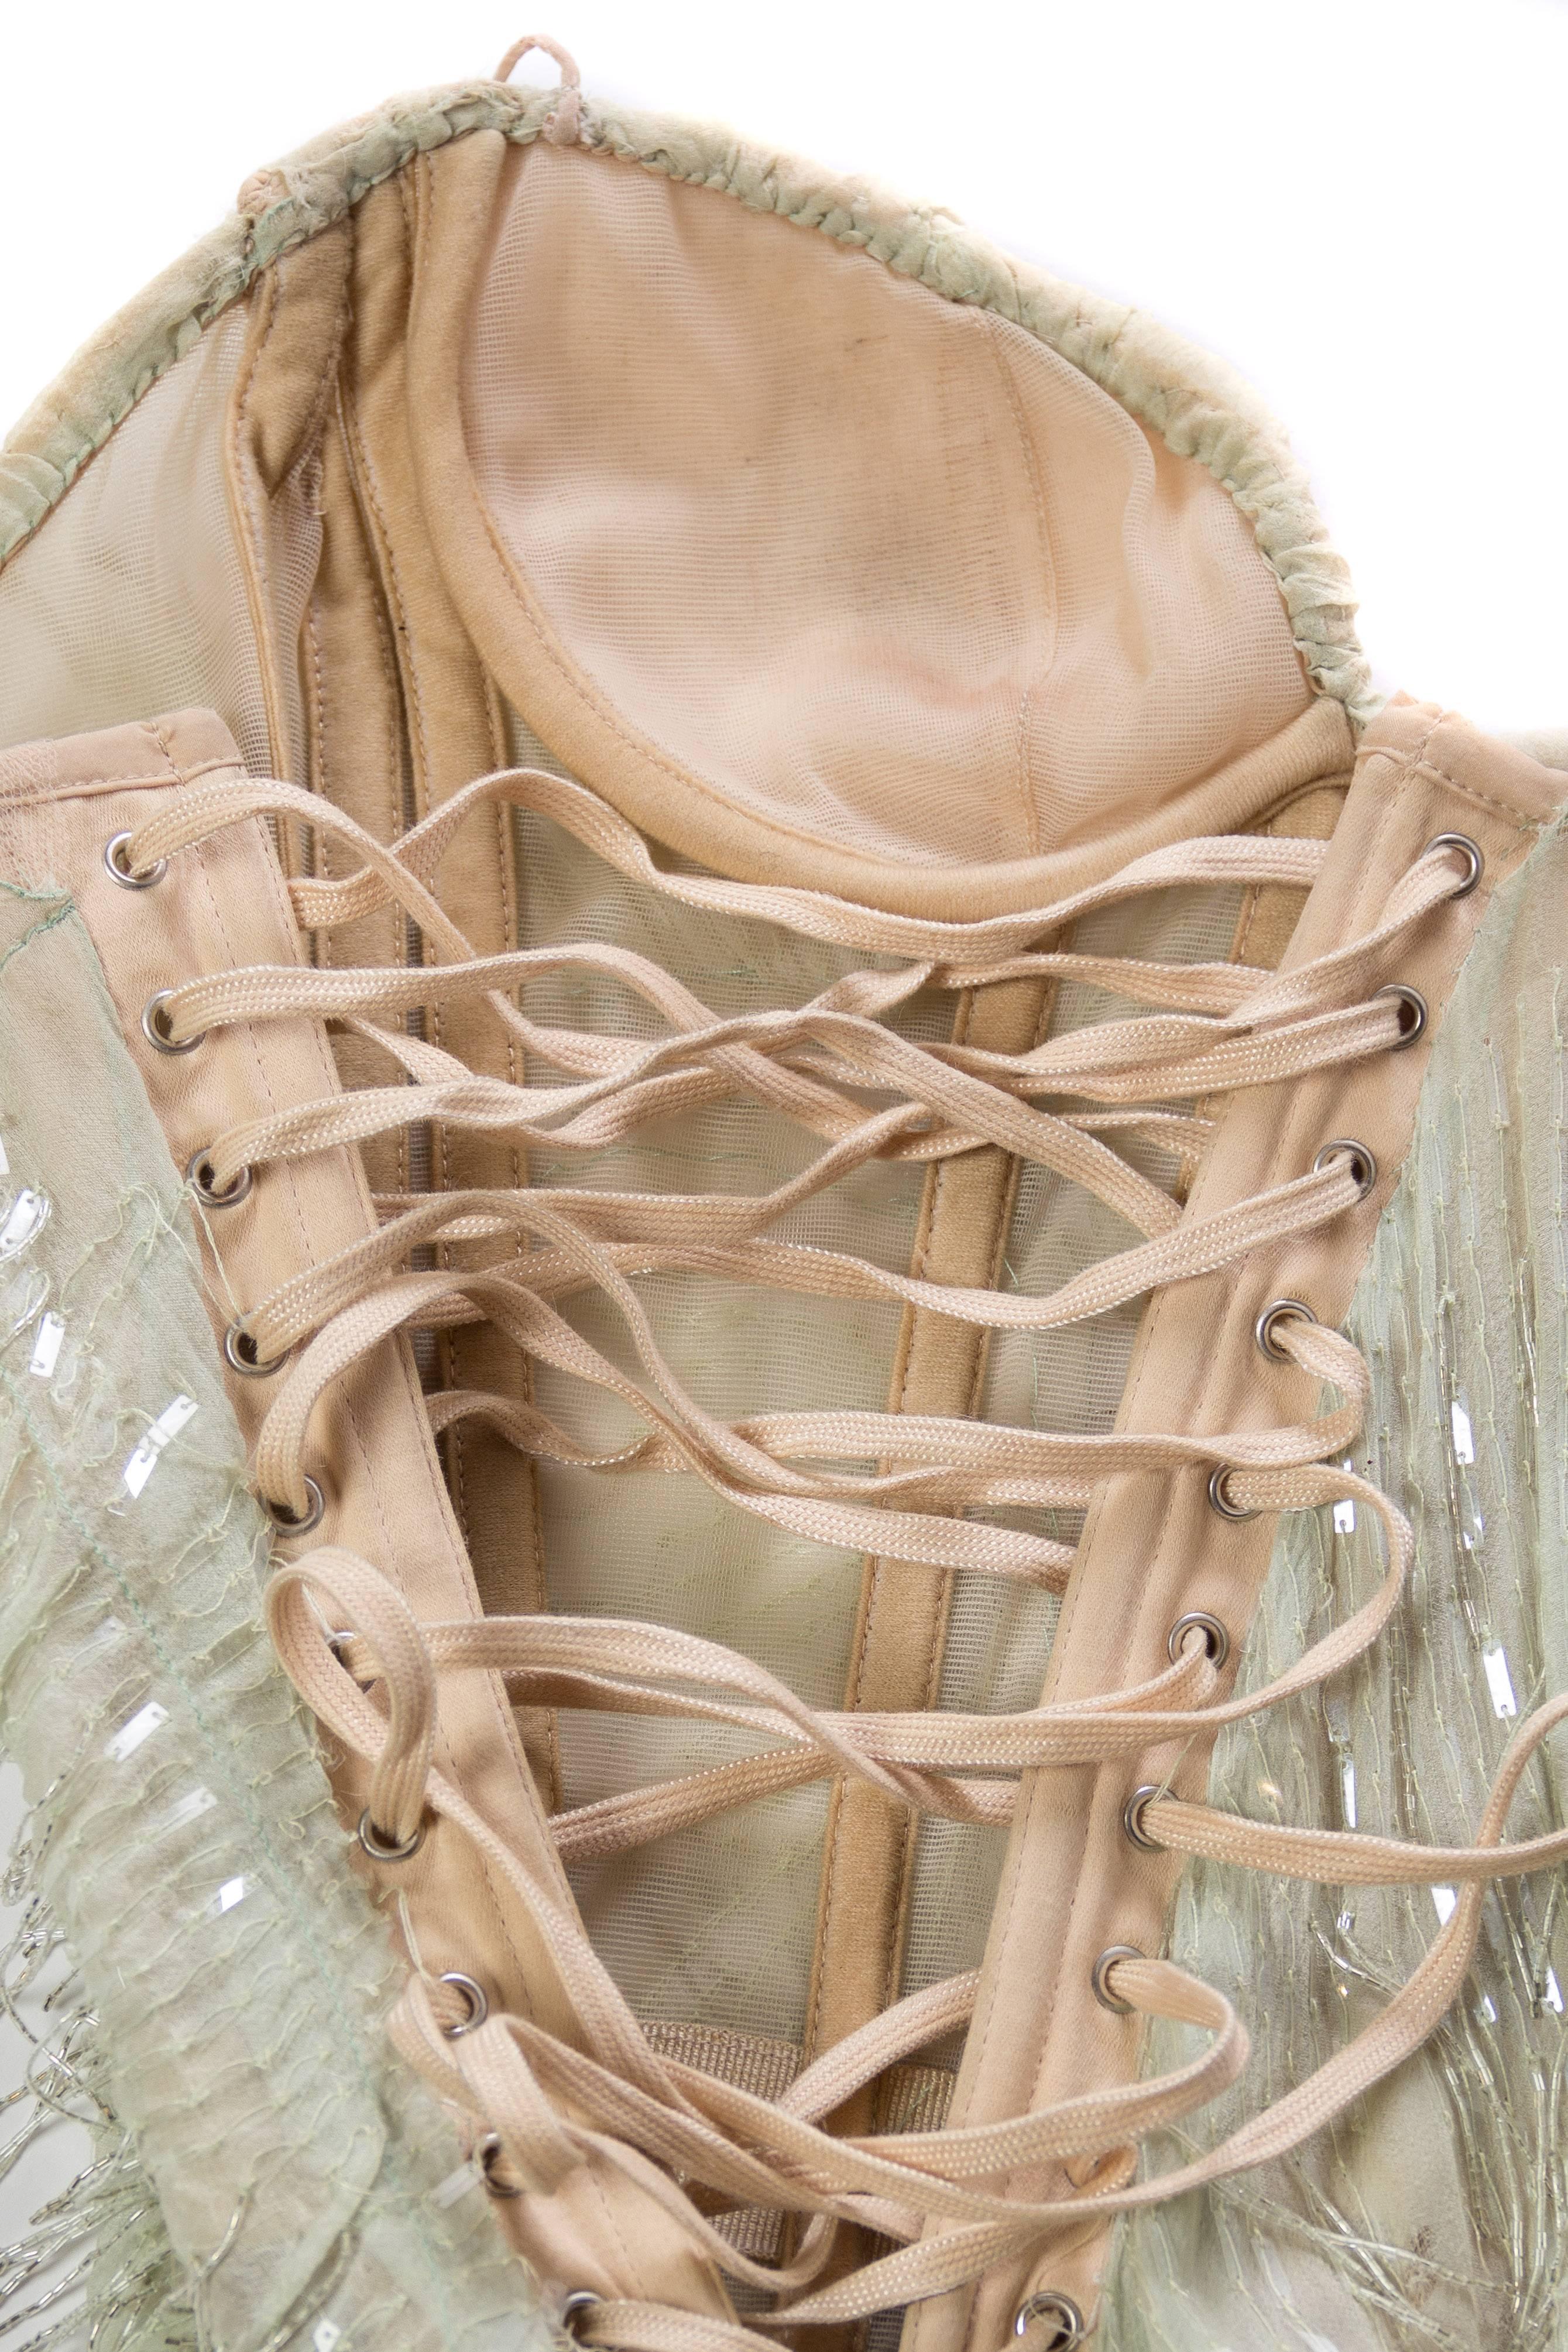 Roberto Cavalli Corset Dress Draped in Chiffon and Bead Fringe 2003 In Excellent Condition In New York, NY